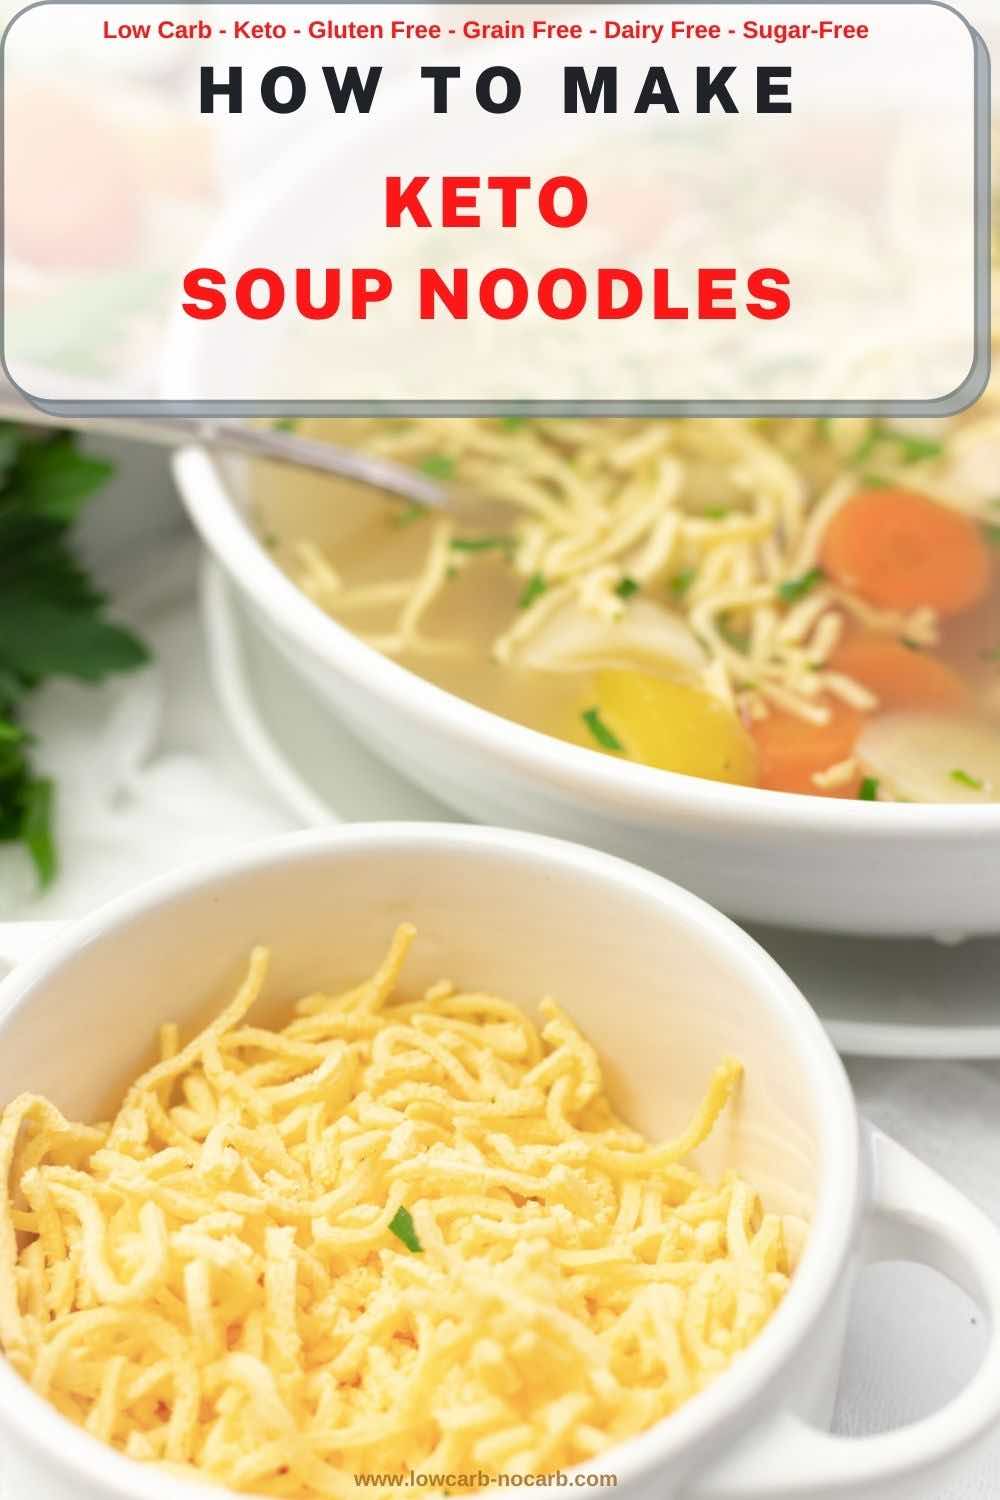 3 ingredients only soup noodles without flour